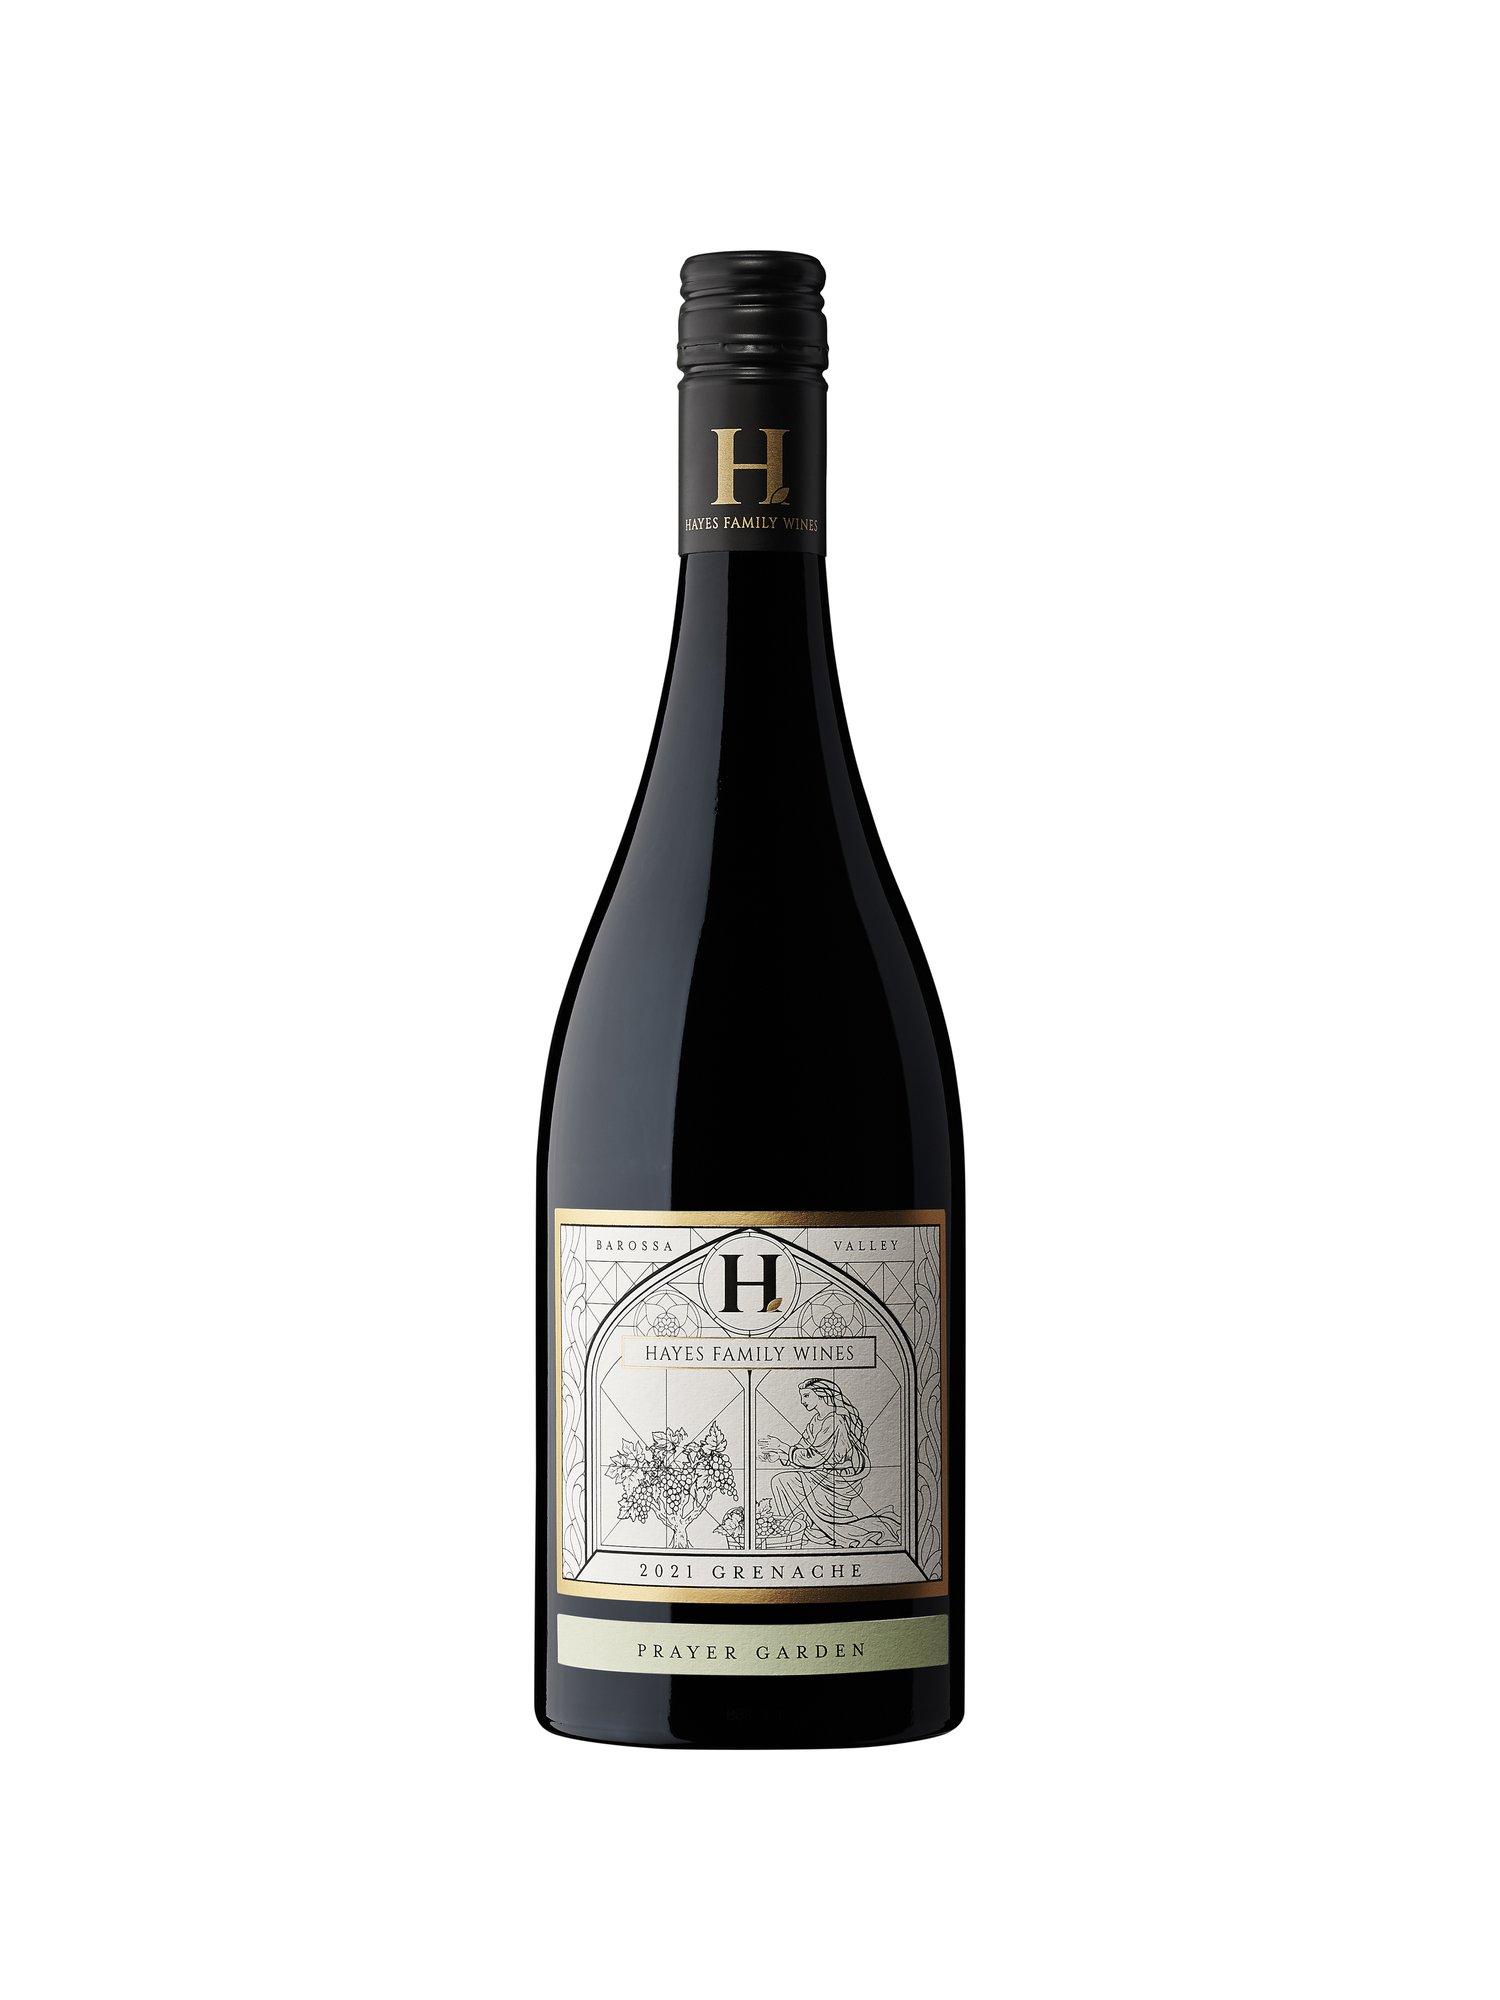 Wines Family Wines over Valley Red Barossa Hayes $35 |